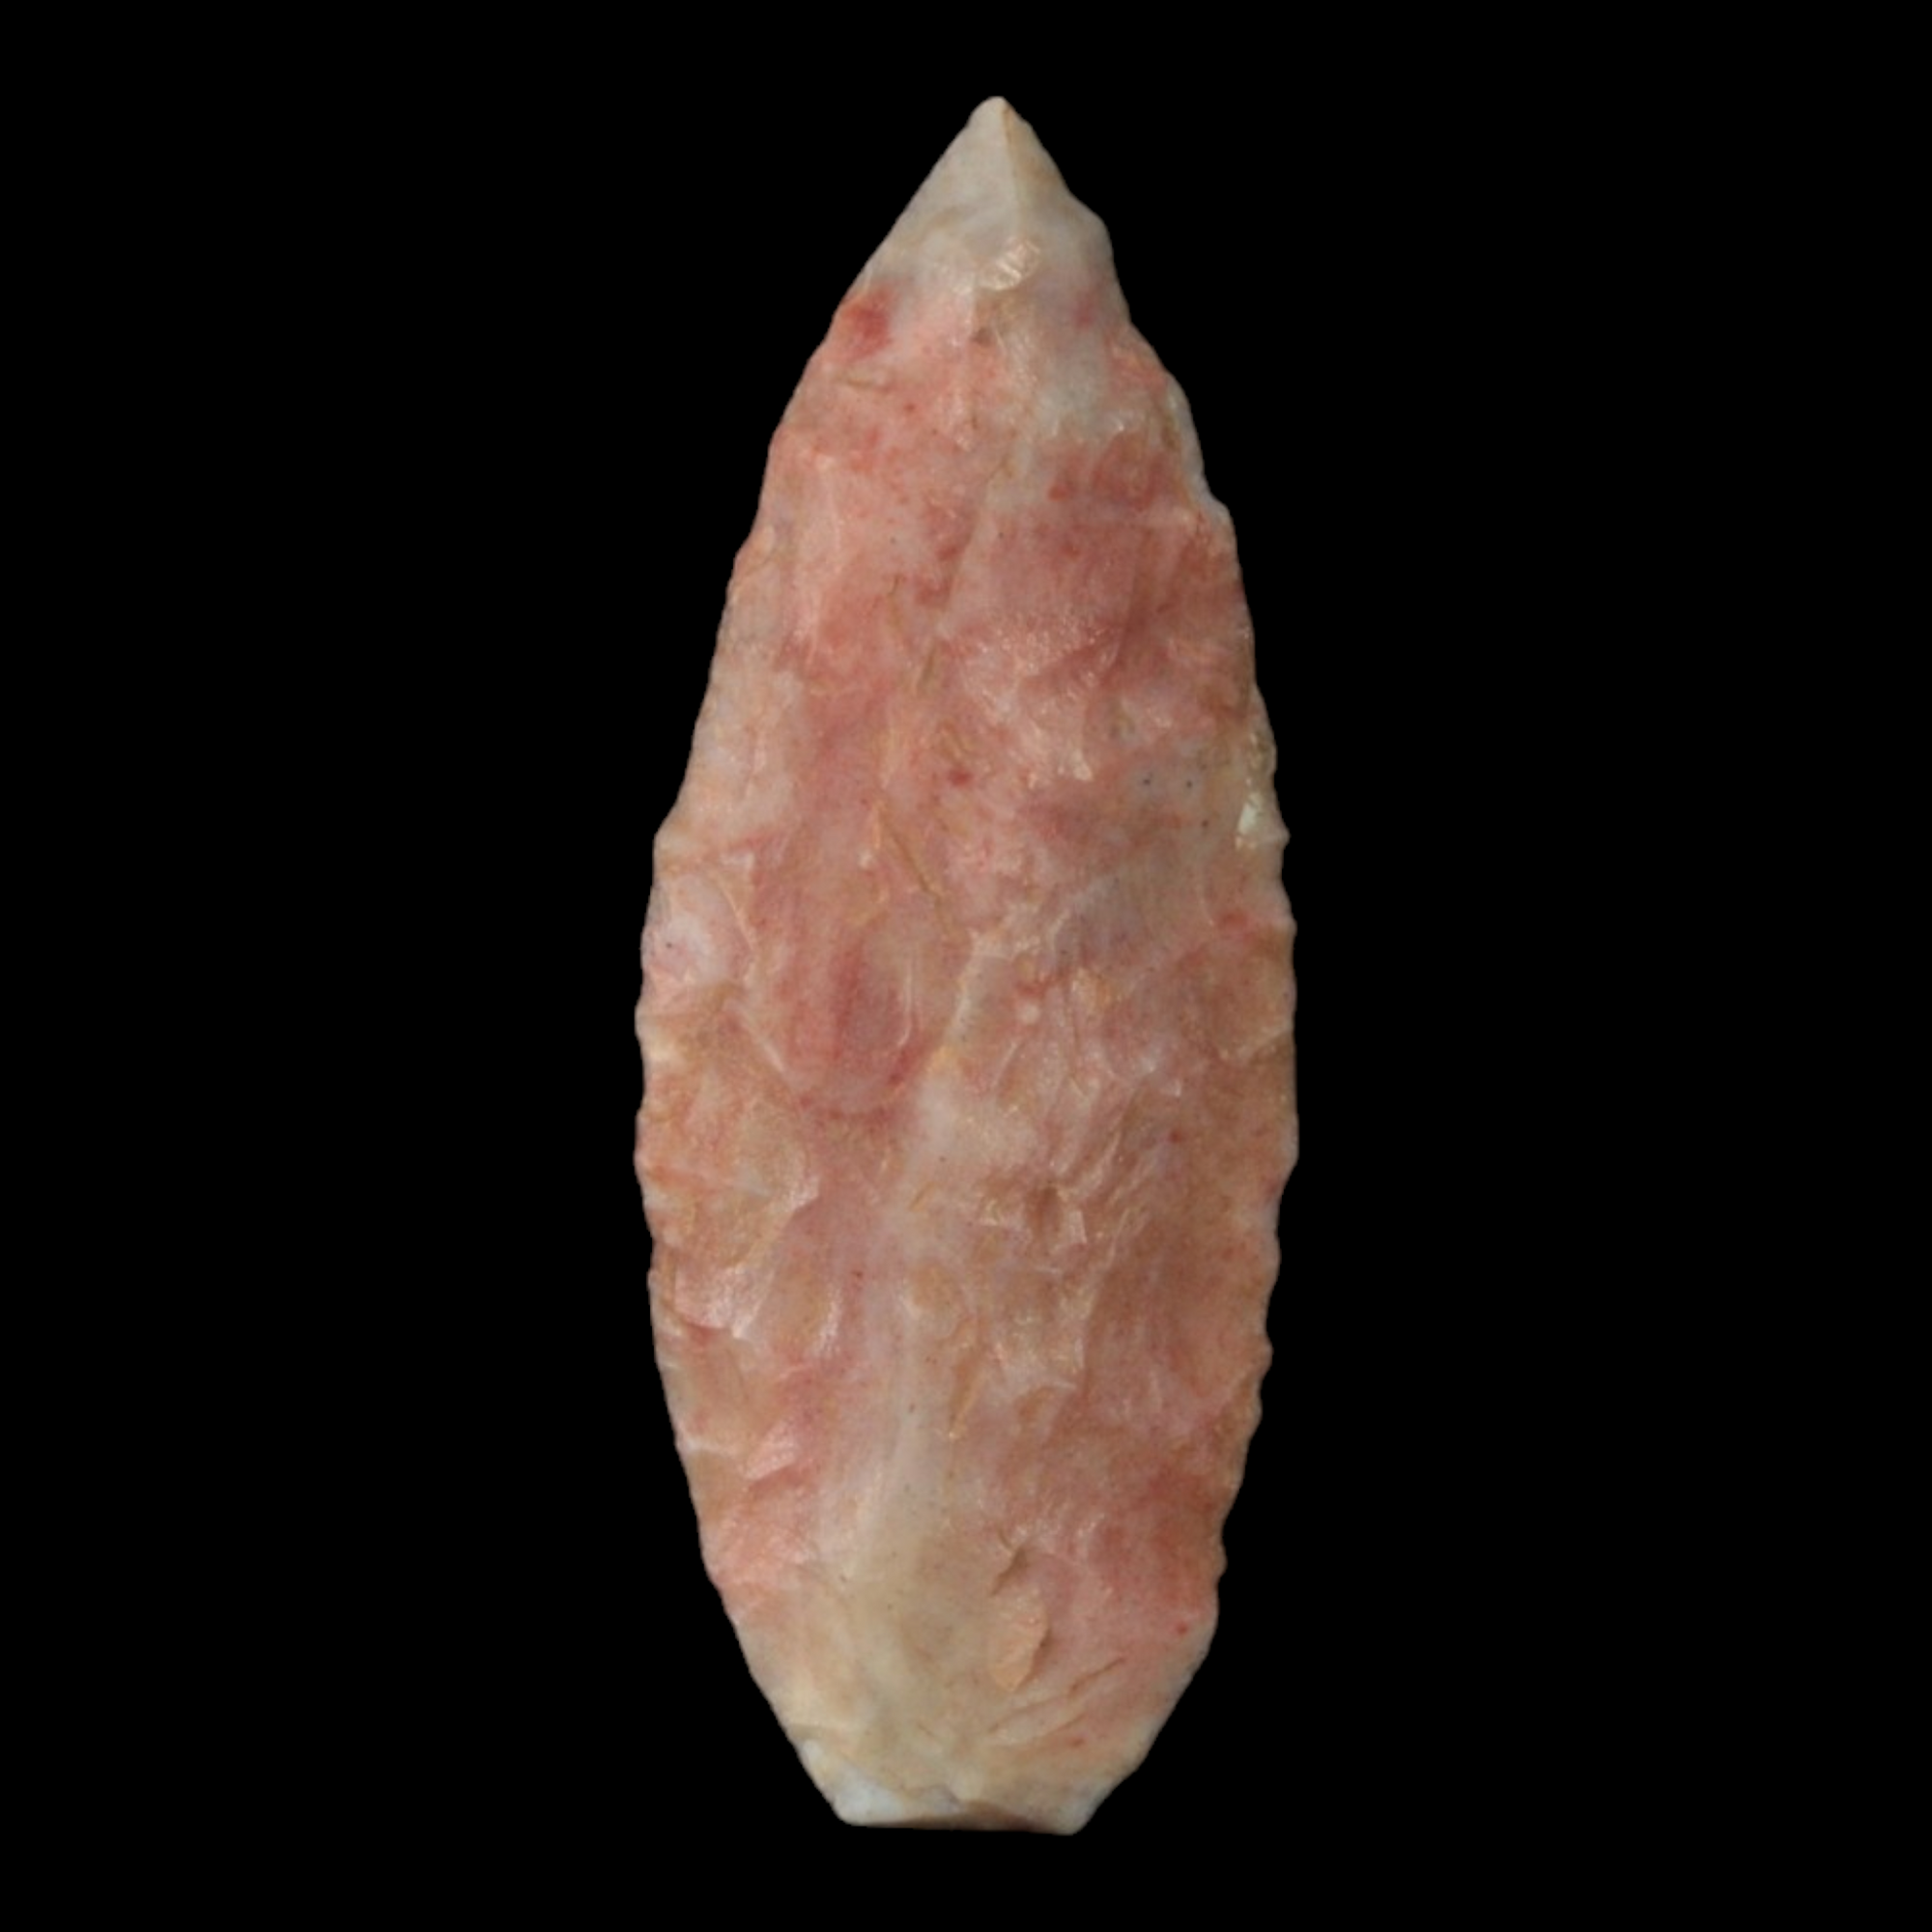 North African Stone Age Arrowhead, 1.3 inches - c. 10,000 to 3000 BCE - North Africa - 1/17/23 Auction